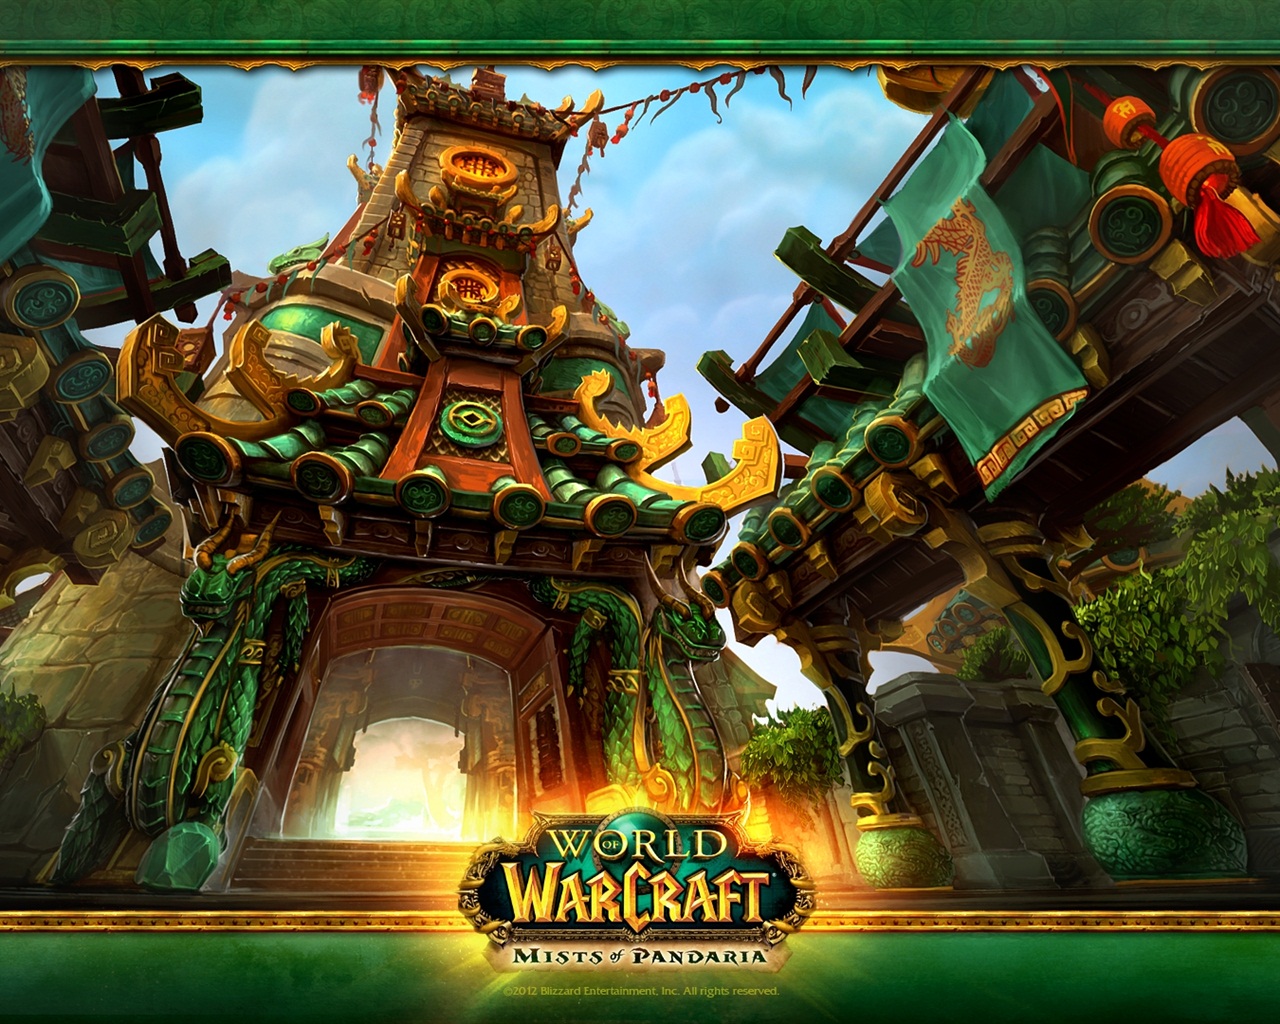 World of Warcraft: Mists of Pandaria HD wallpapers #6 - 1280x1024